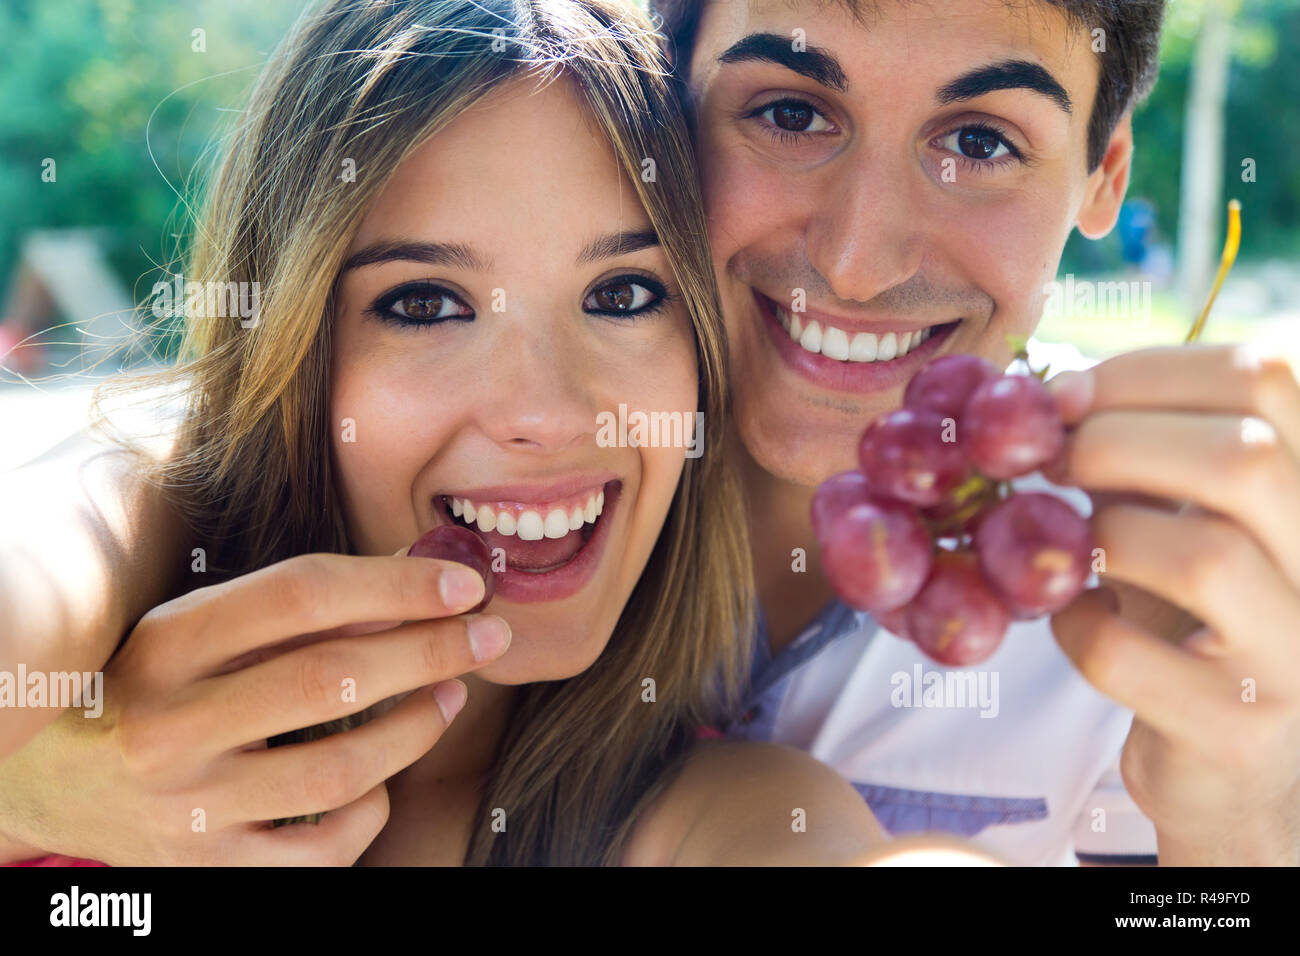 Young couple eating grapes on romantic picnic in countryside. Stock Photo